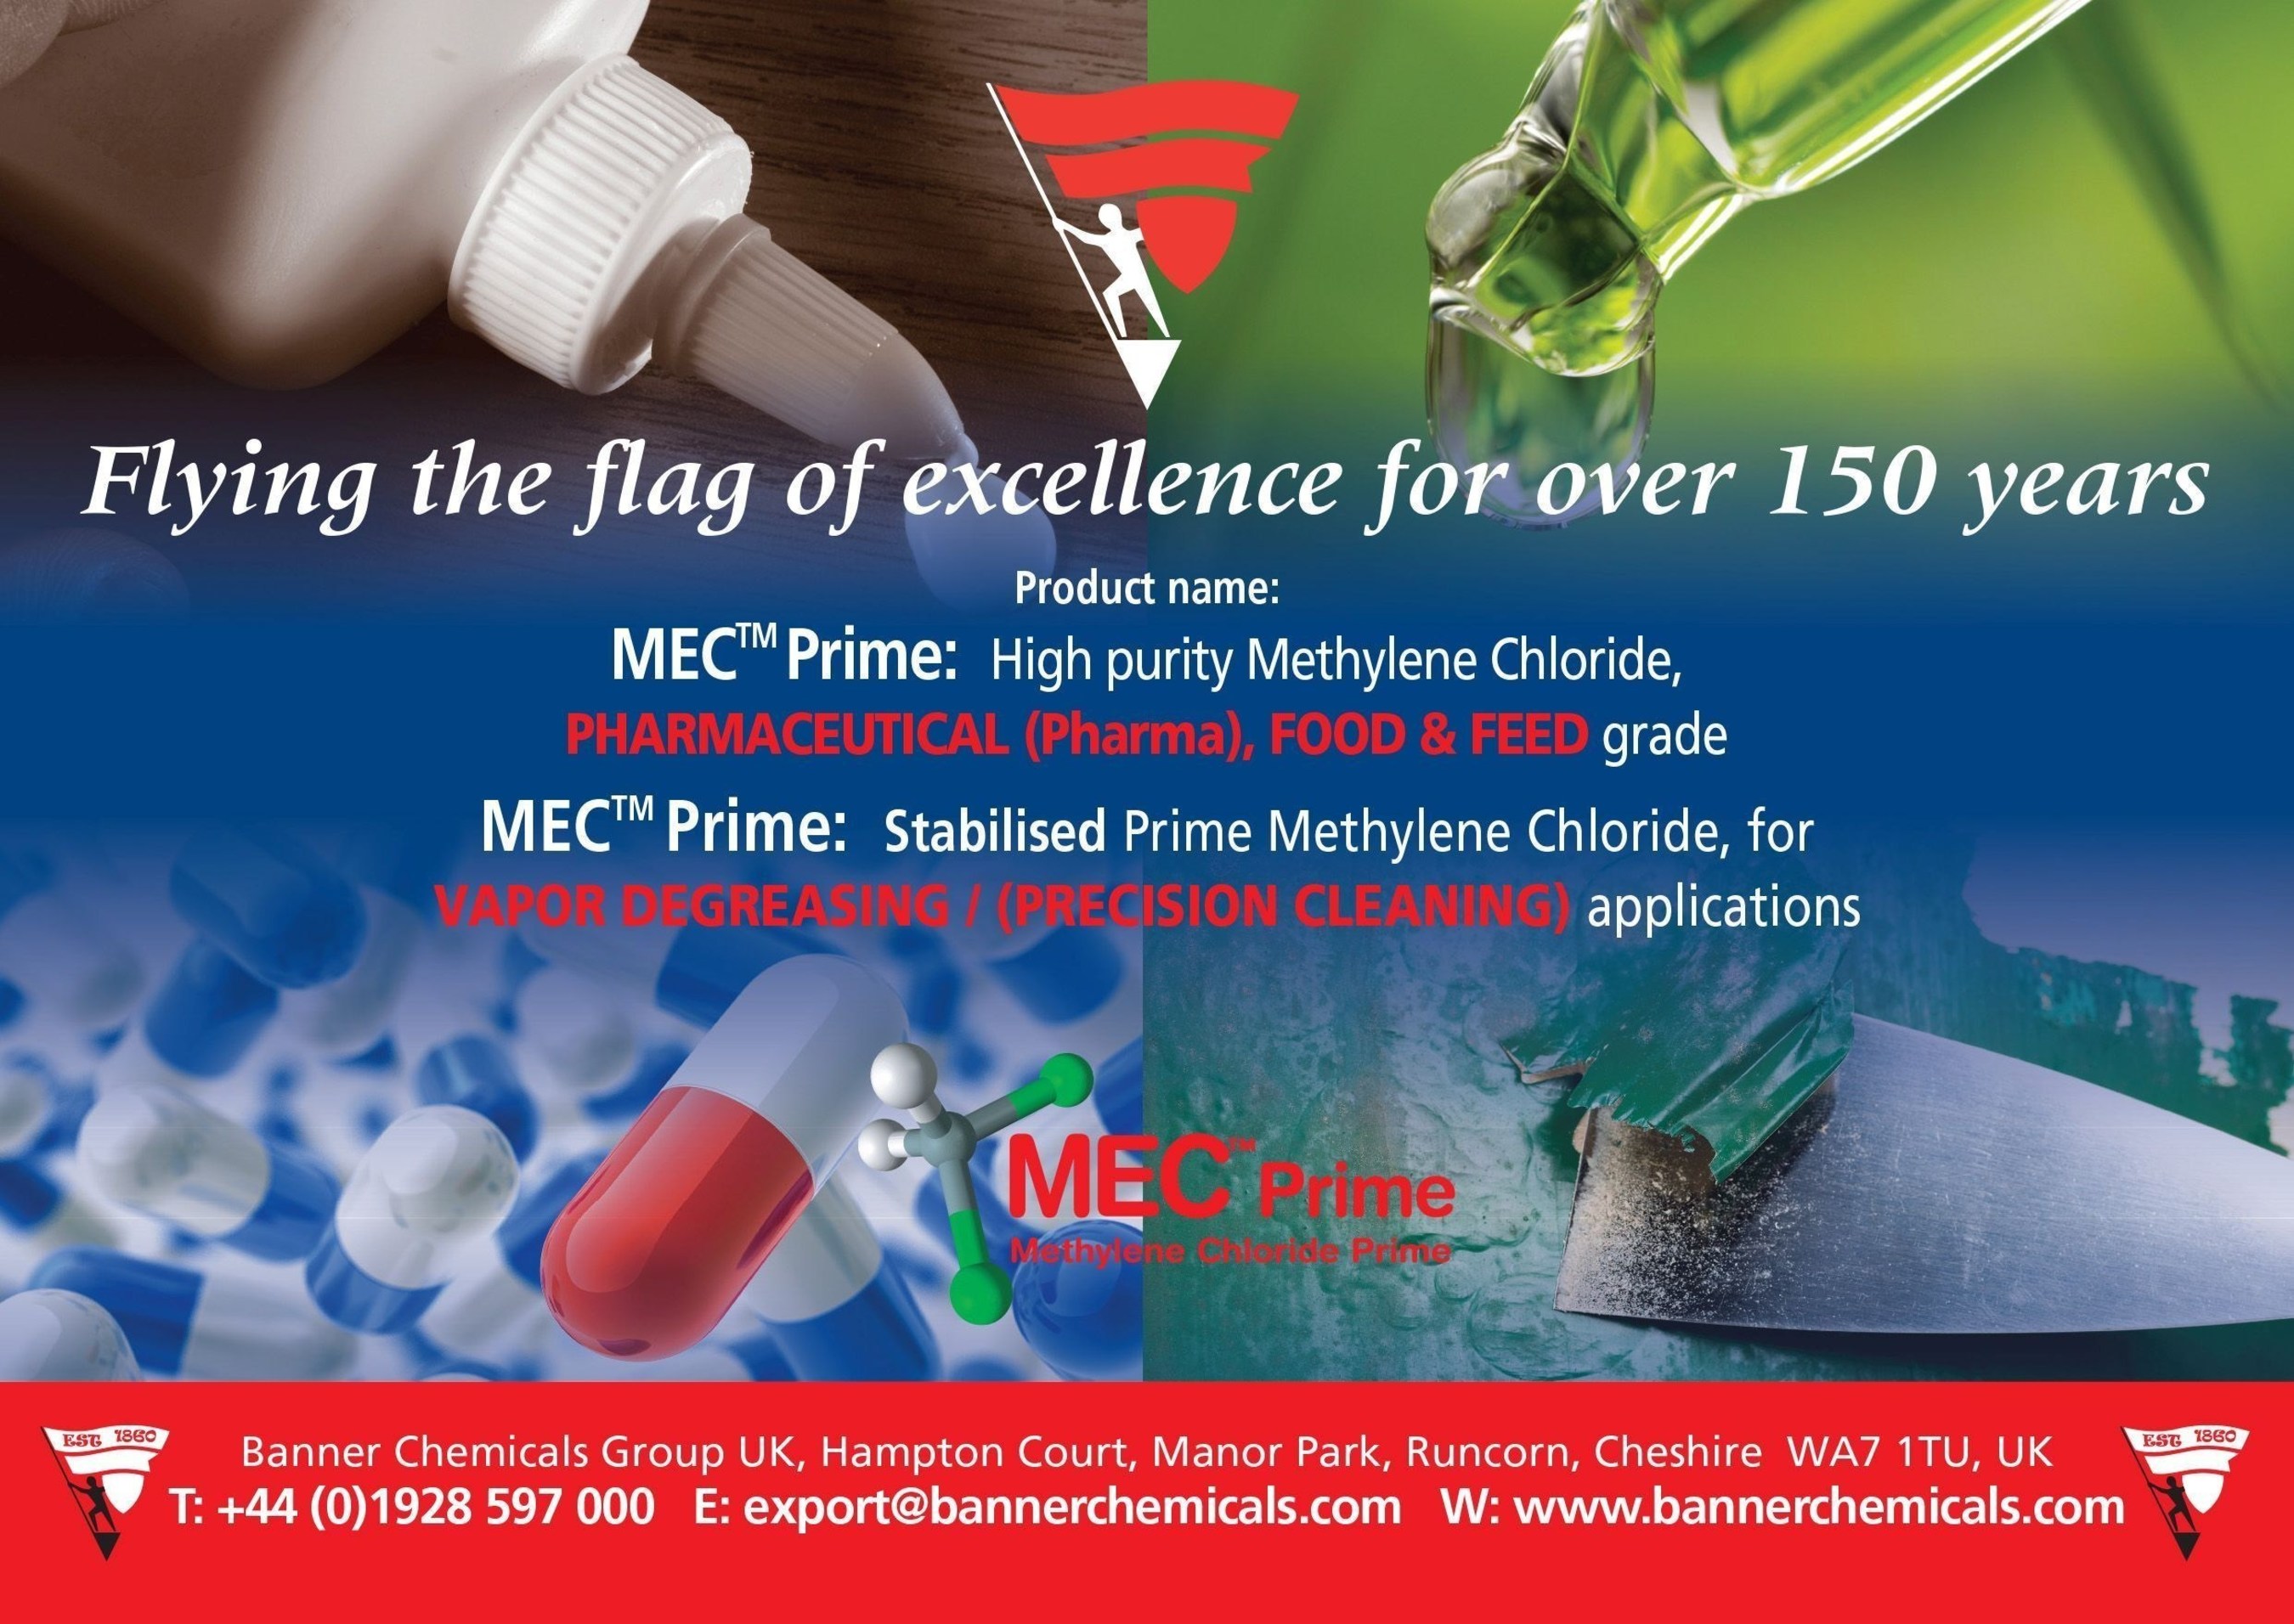 MEC(TM) Prime - Methylene Chloride Prime, High purity, PHARMACEUTICAL, FOOD & FEED grade and precision cleaning, DEGREASING grade (PRNewsFoto/Banner Chemicals UK) (PRNewsFoto/Banner Chemicals UK)